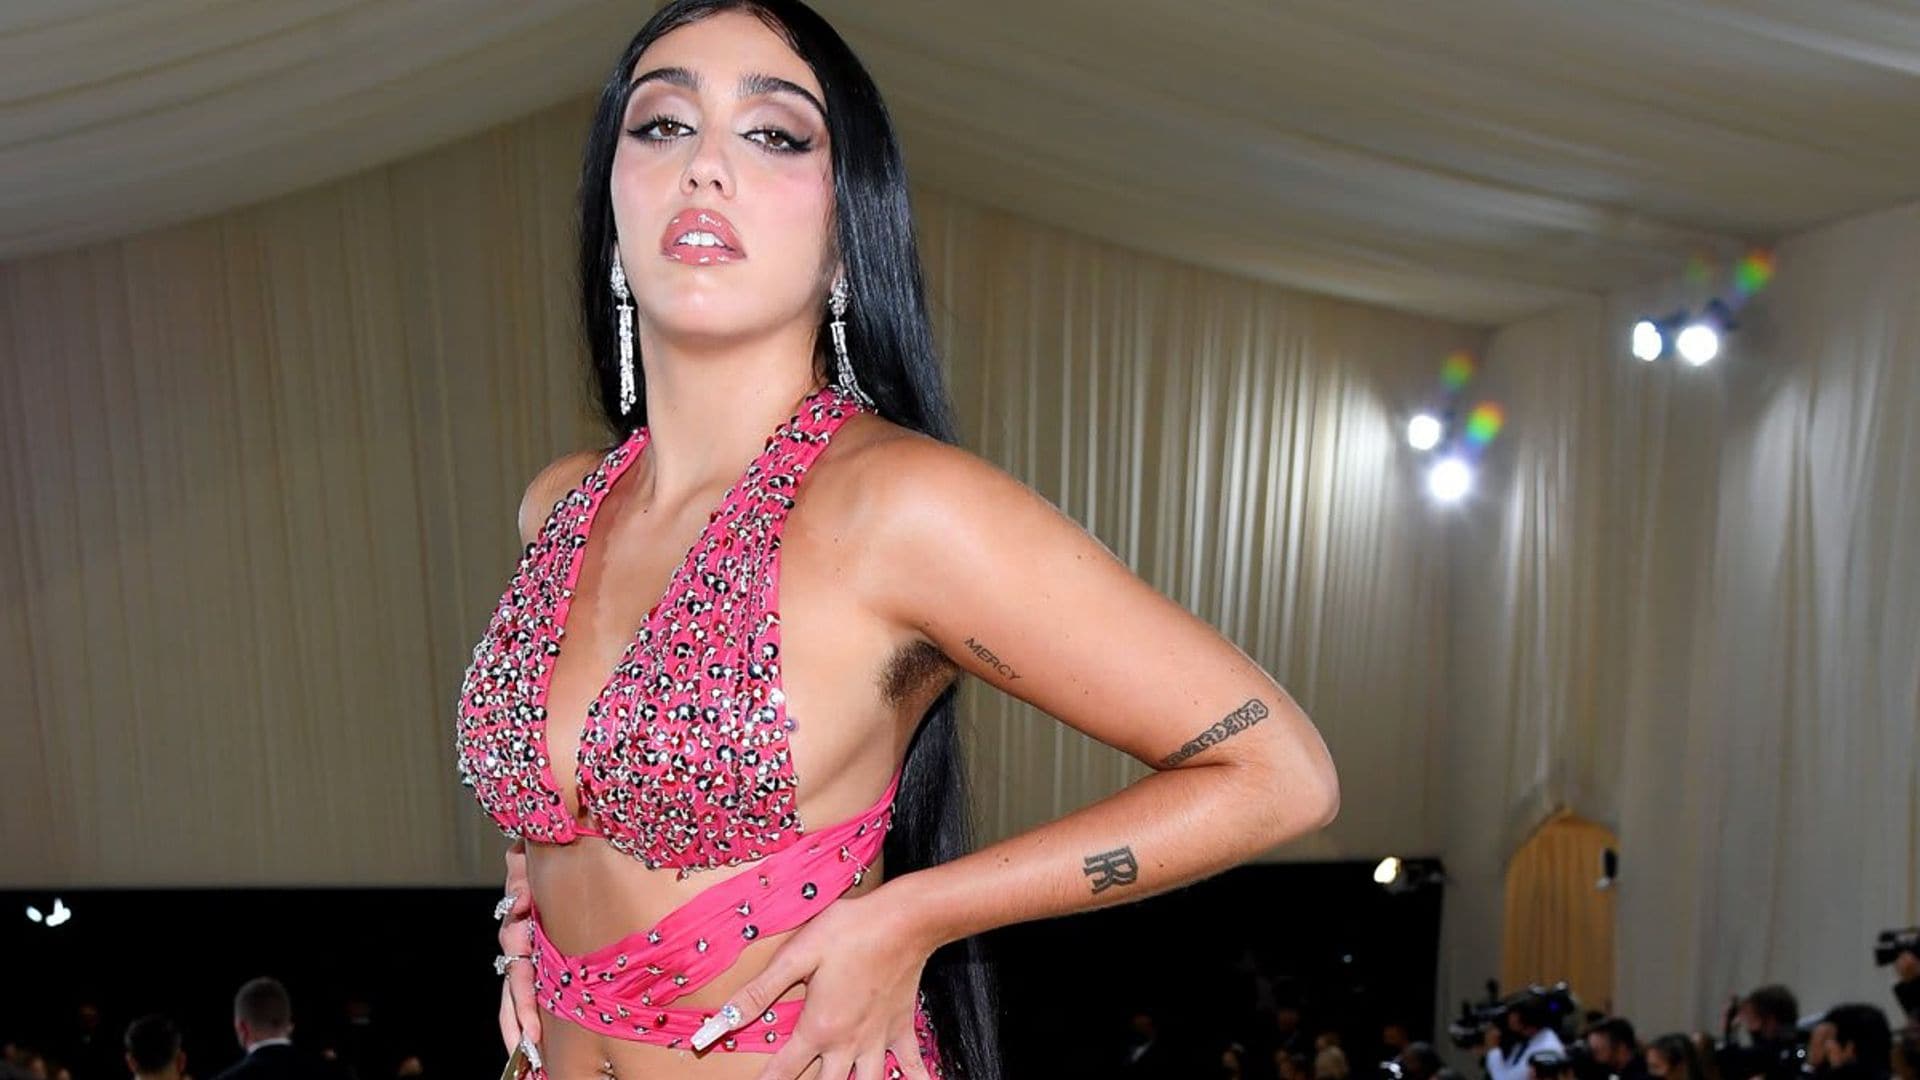 Lourdes Leon says she has a ‘base layer of hatred’ because she is Madonna’s daughter